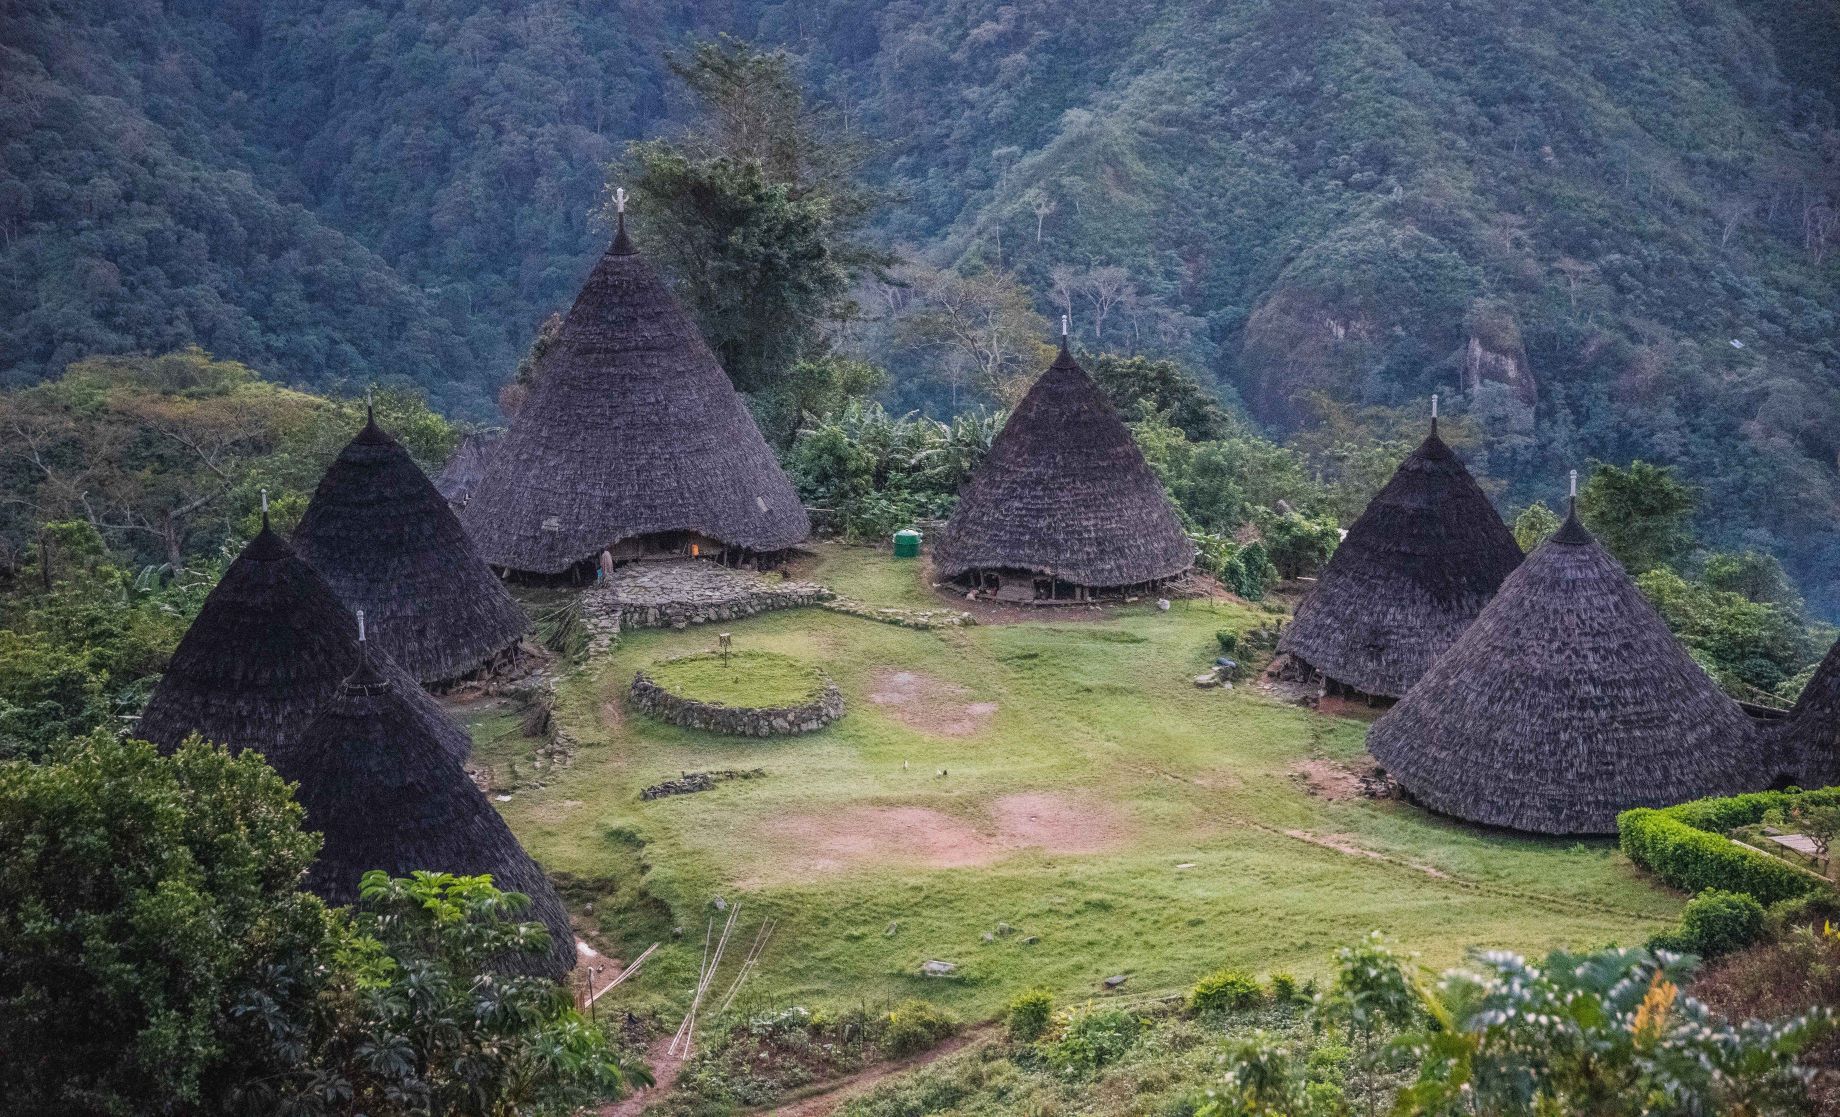 The indigenous Wae Rebo community, who live on a mountain plateau in Indonesia, are using tourism to keep their traditions alive. Photo: Ian Finch